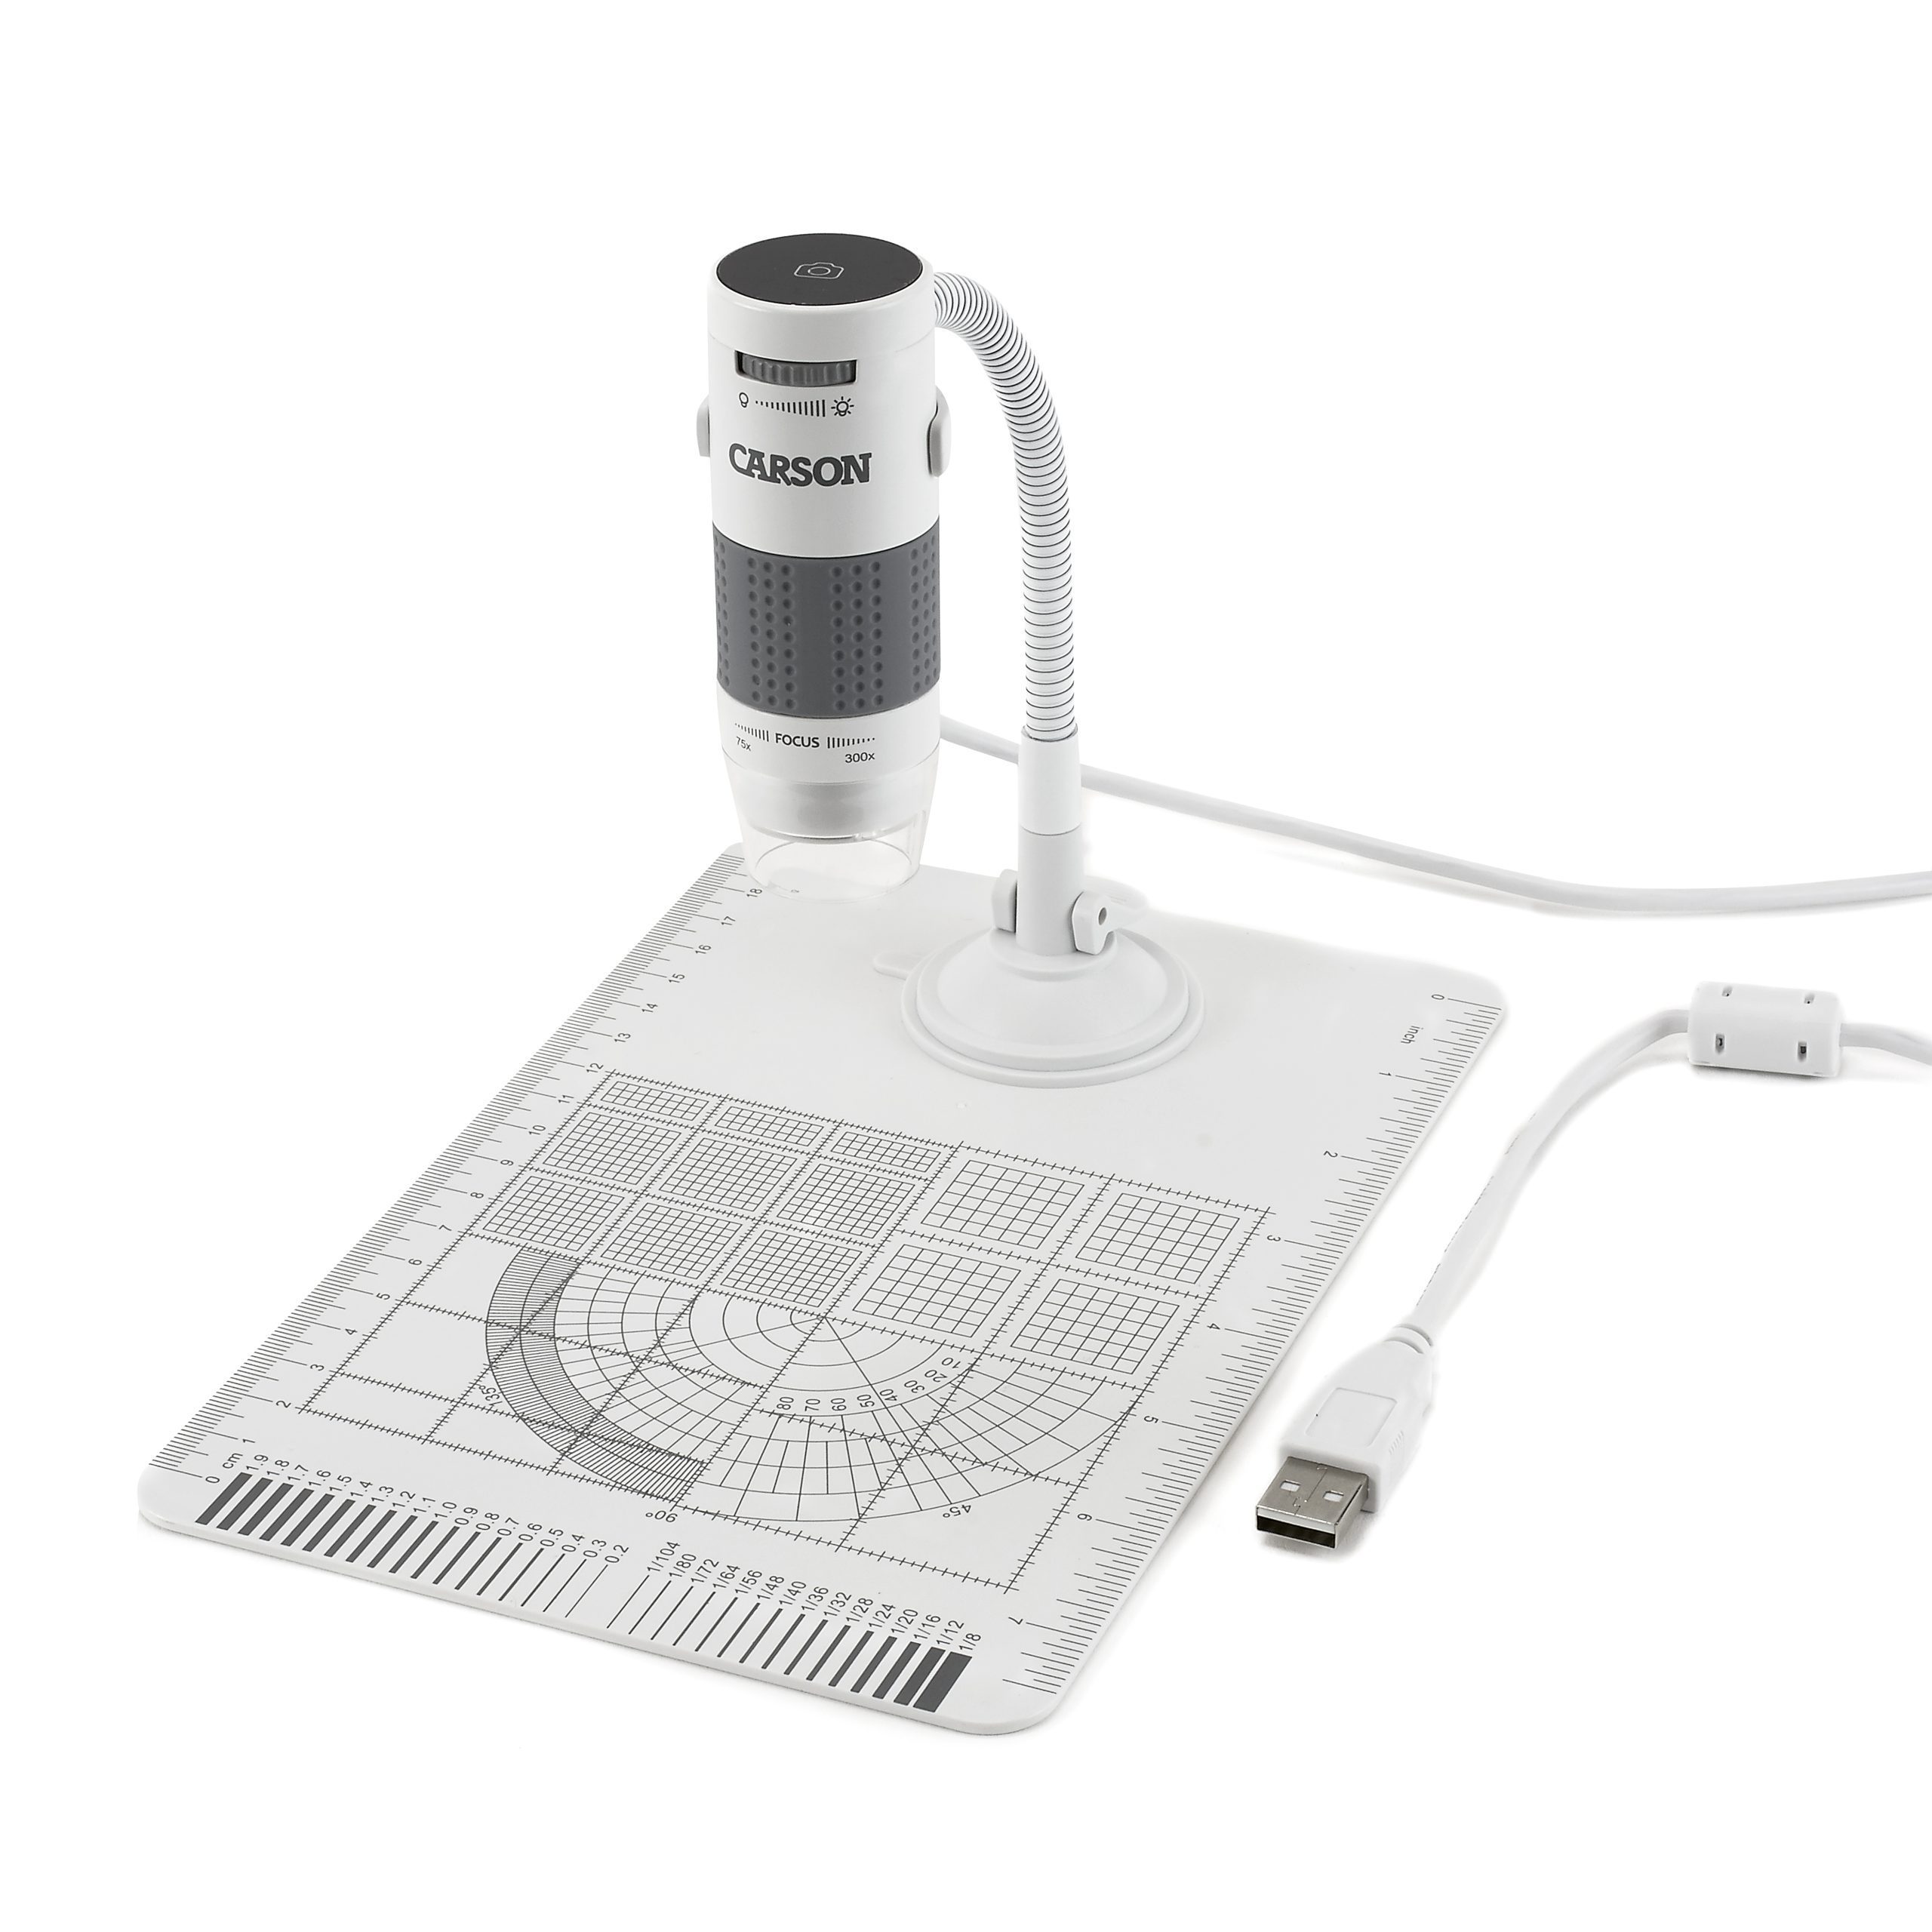 MM-840 LED Lighted USB Digital Microscope with Flexible Stand and Base Based on a 21 monitor Carson eFlex 75x/300x Effective Magnification White